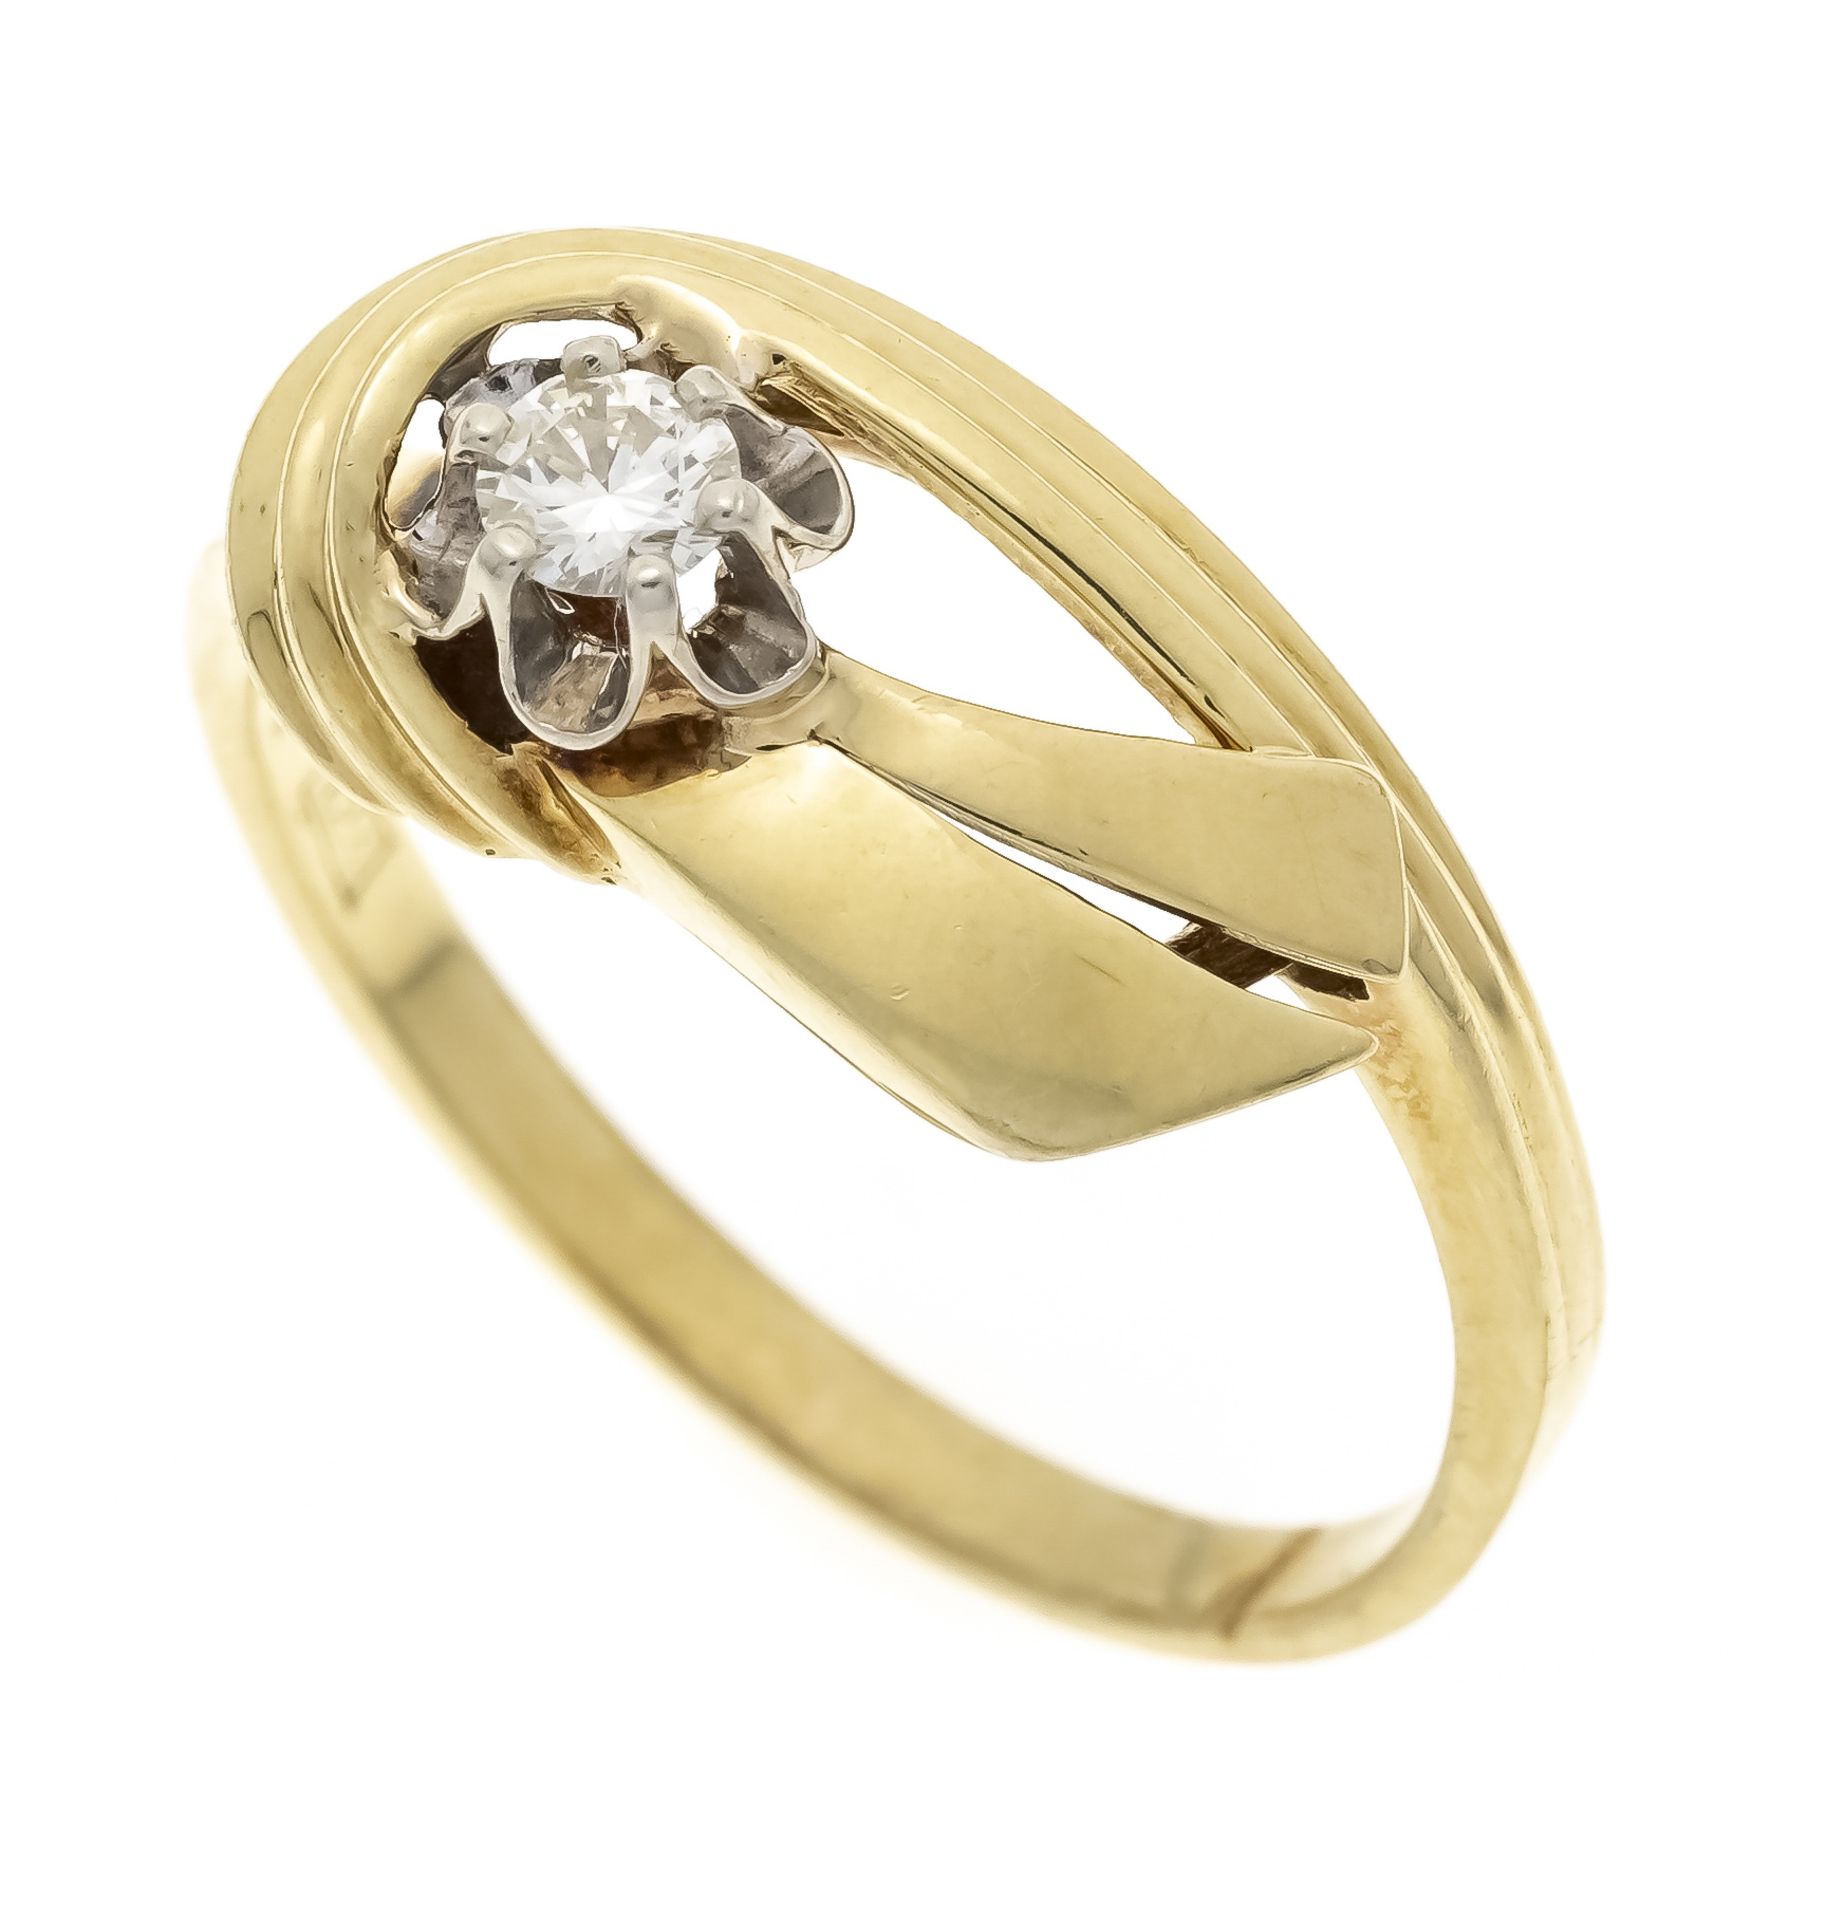 Diamond ring GG/WG 585/000 with a brilliant-cut diamond 0.124 ct (stamped) W/VS-SI, notch in the